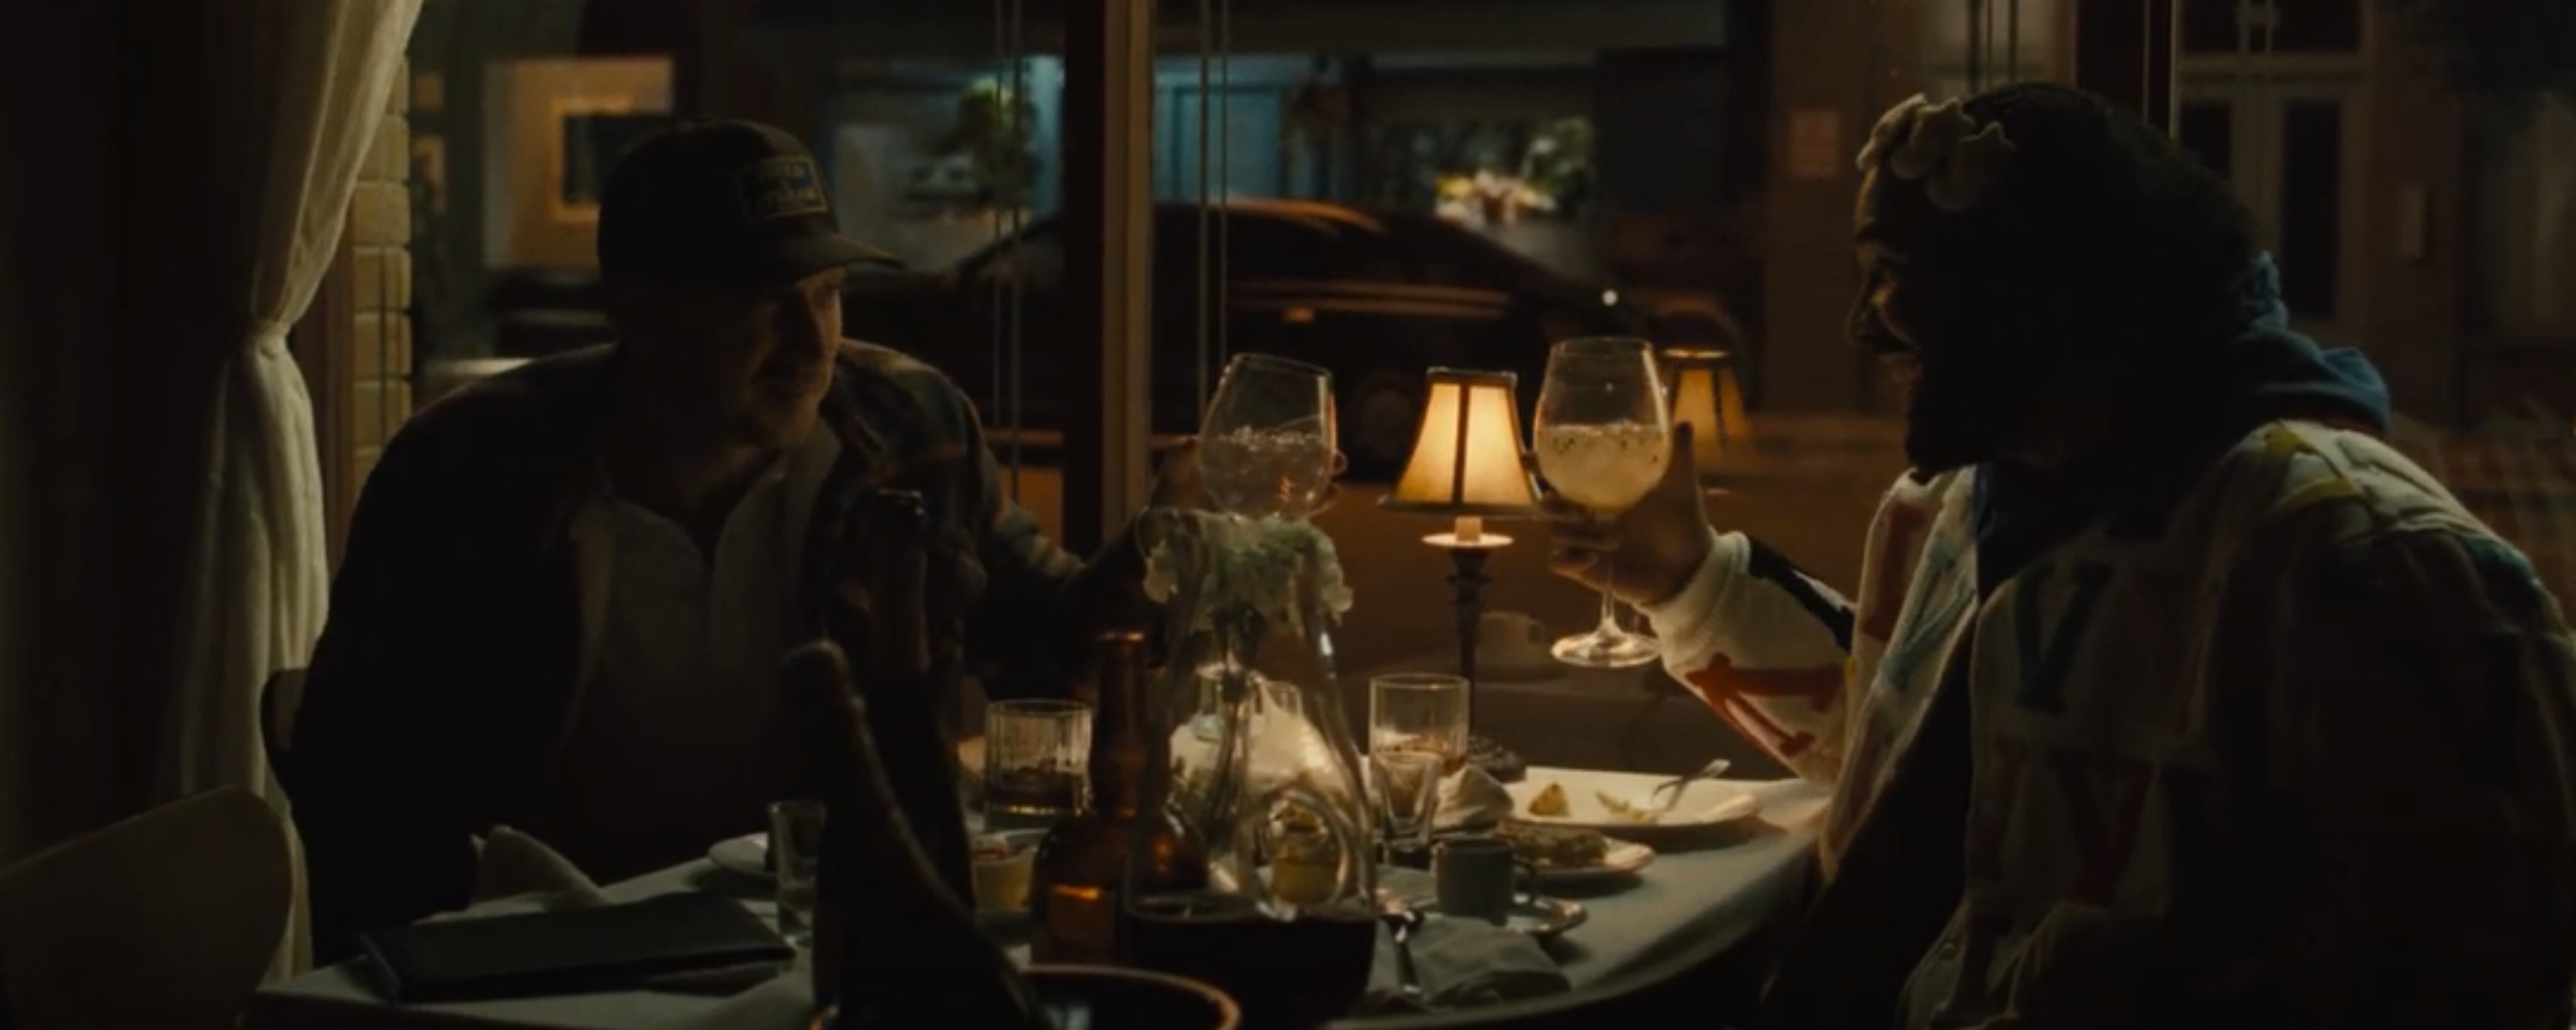 Morgan Wallen and Drake Grab a Fancy Dinner That Ends in Disaster in New “You Broke My Heart” Music Video